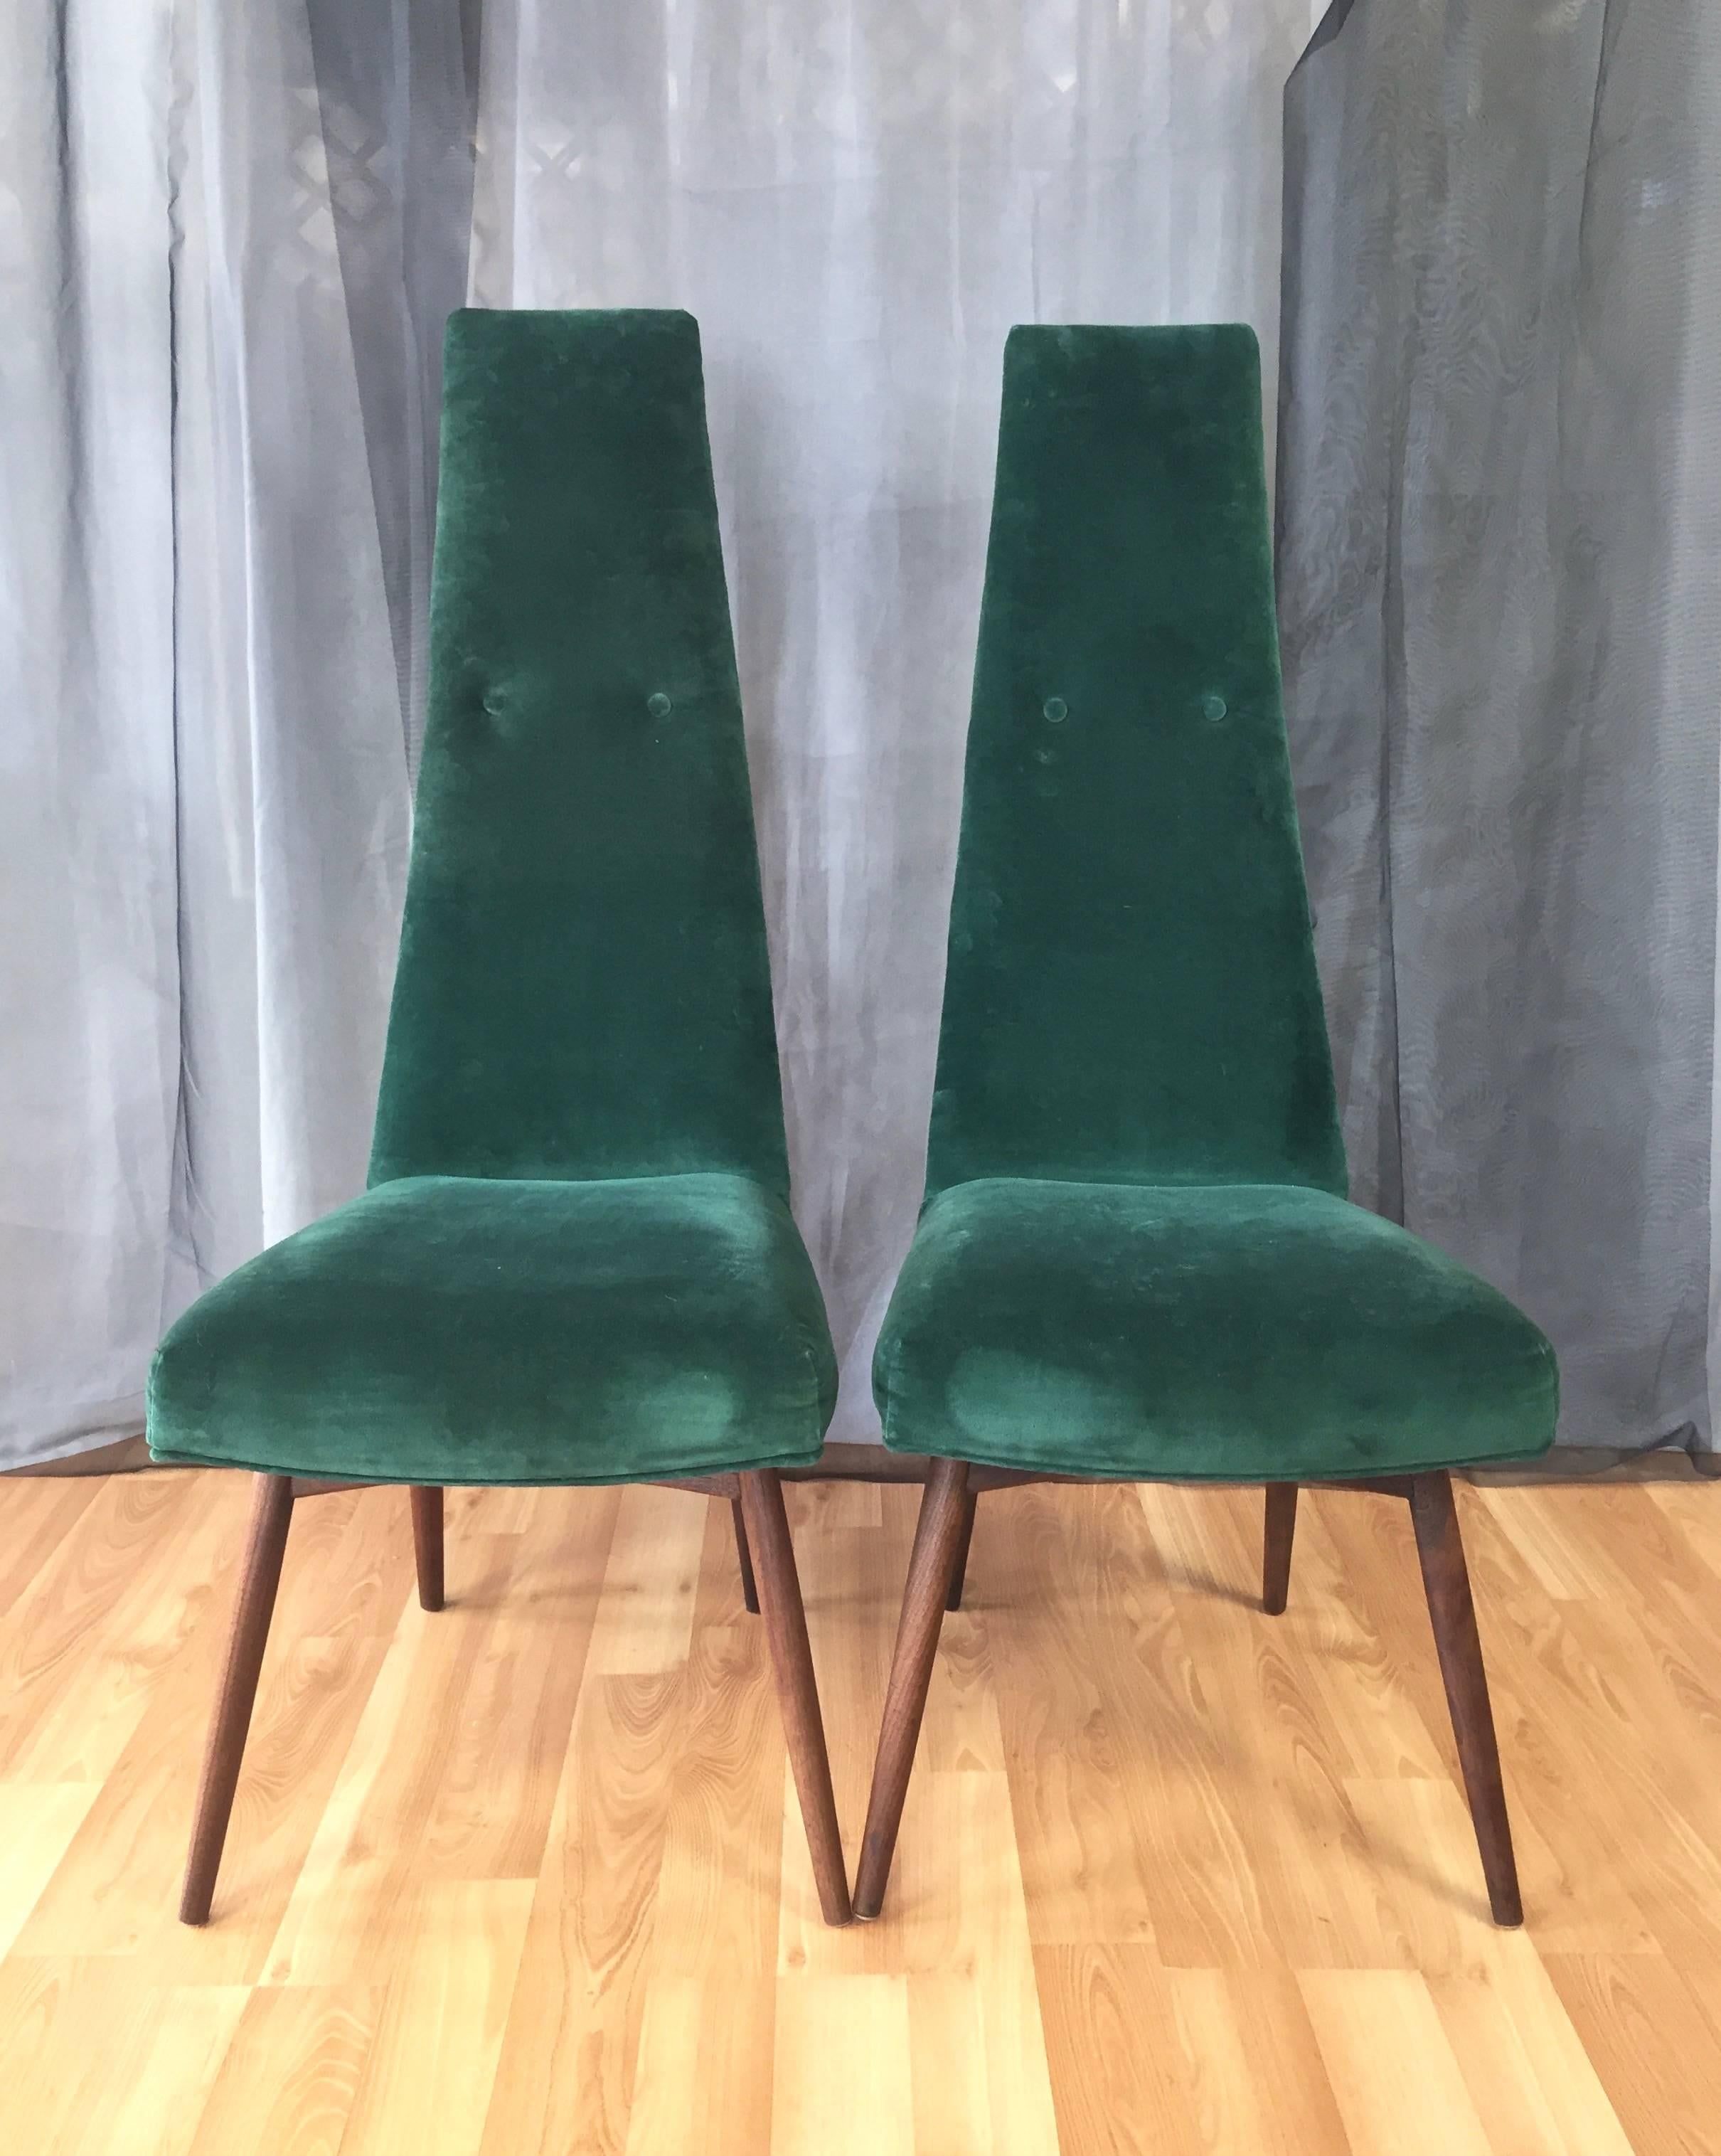 A Mid-Century Modern set of six upholstered walnut dining chairs – four side and two high back by Adrian Pearsall for Craft Associates.

With solid walnut base and supremely comfortable seat upholstered in emerald green velvet. Each is accented by